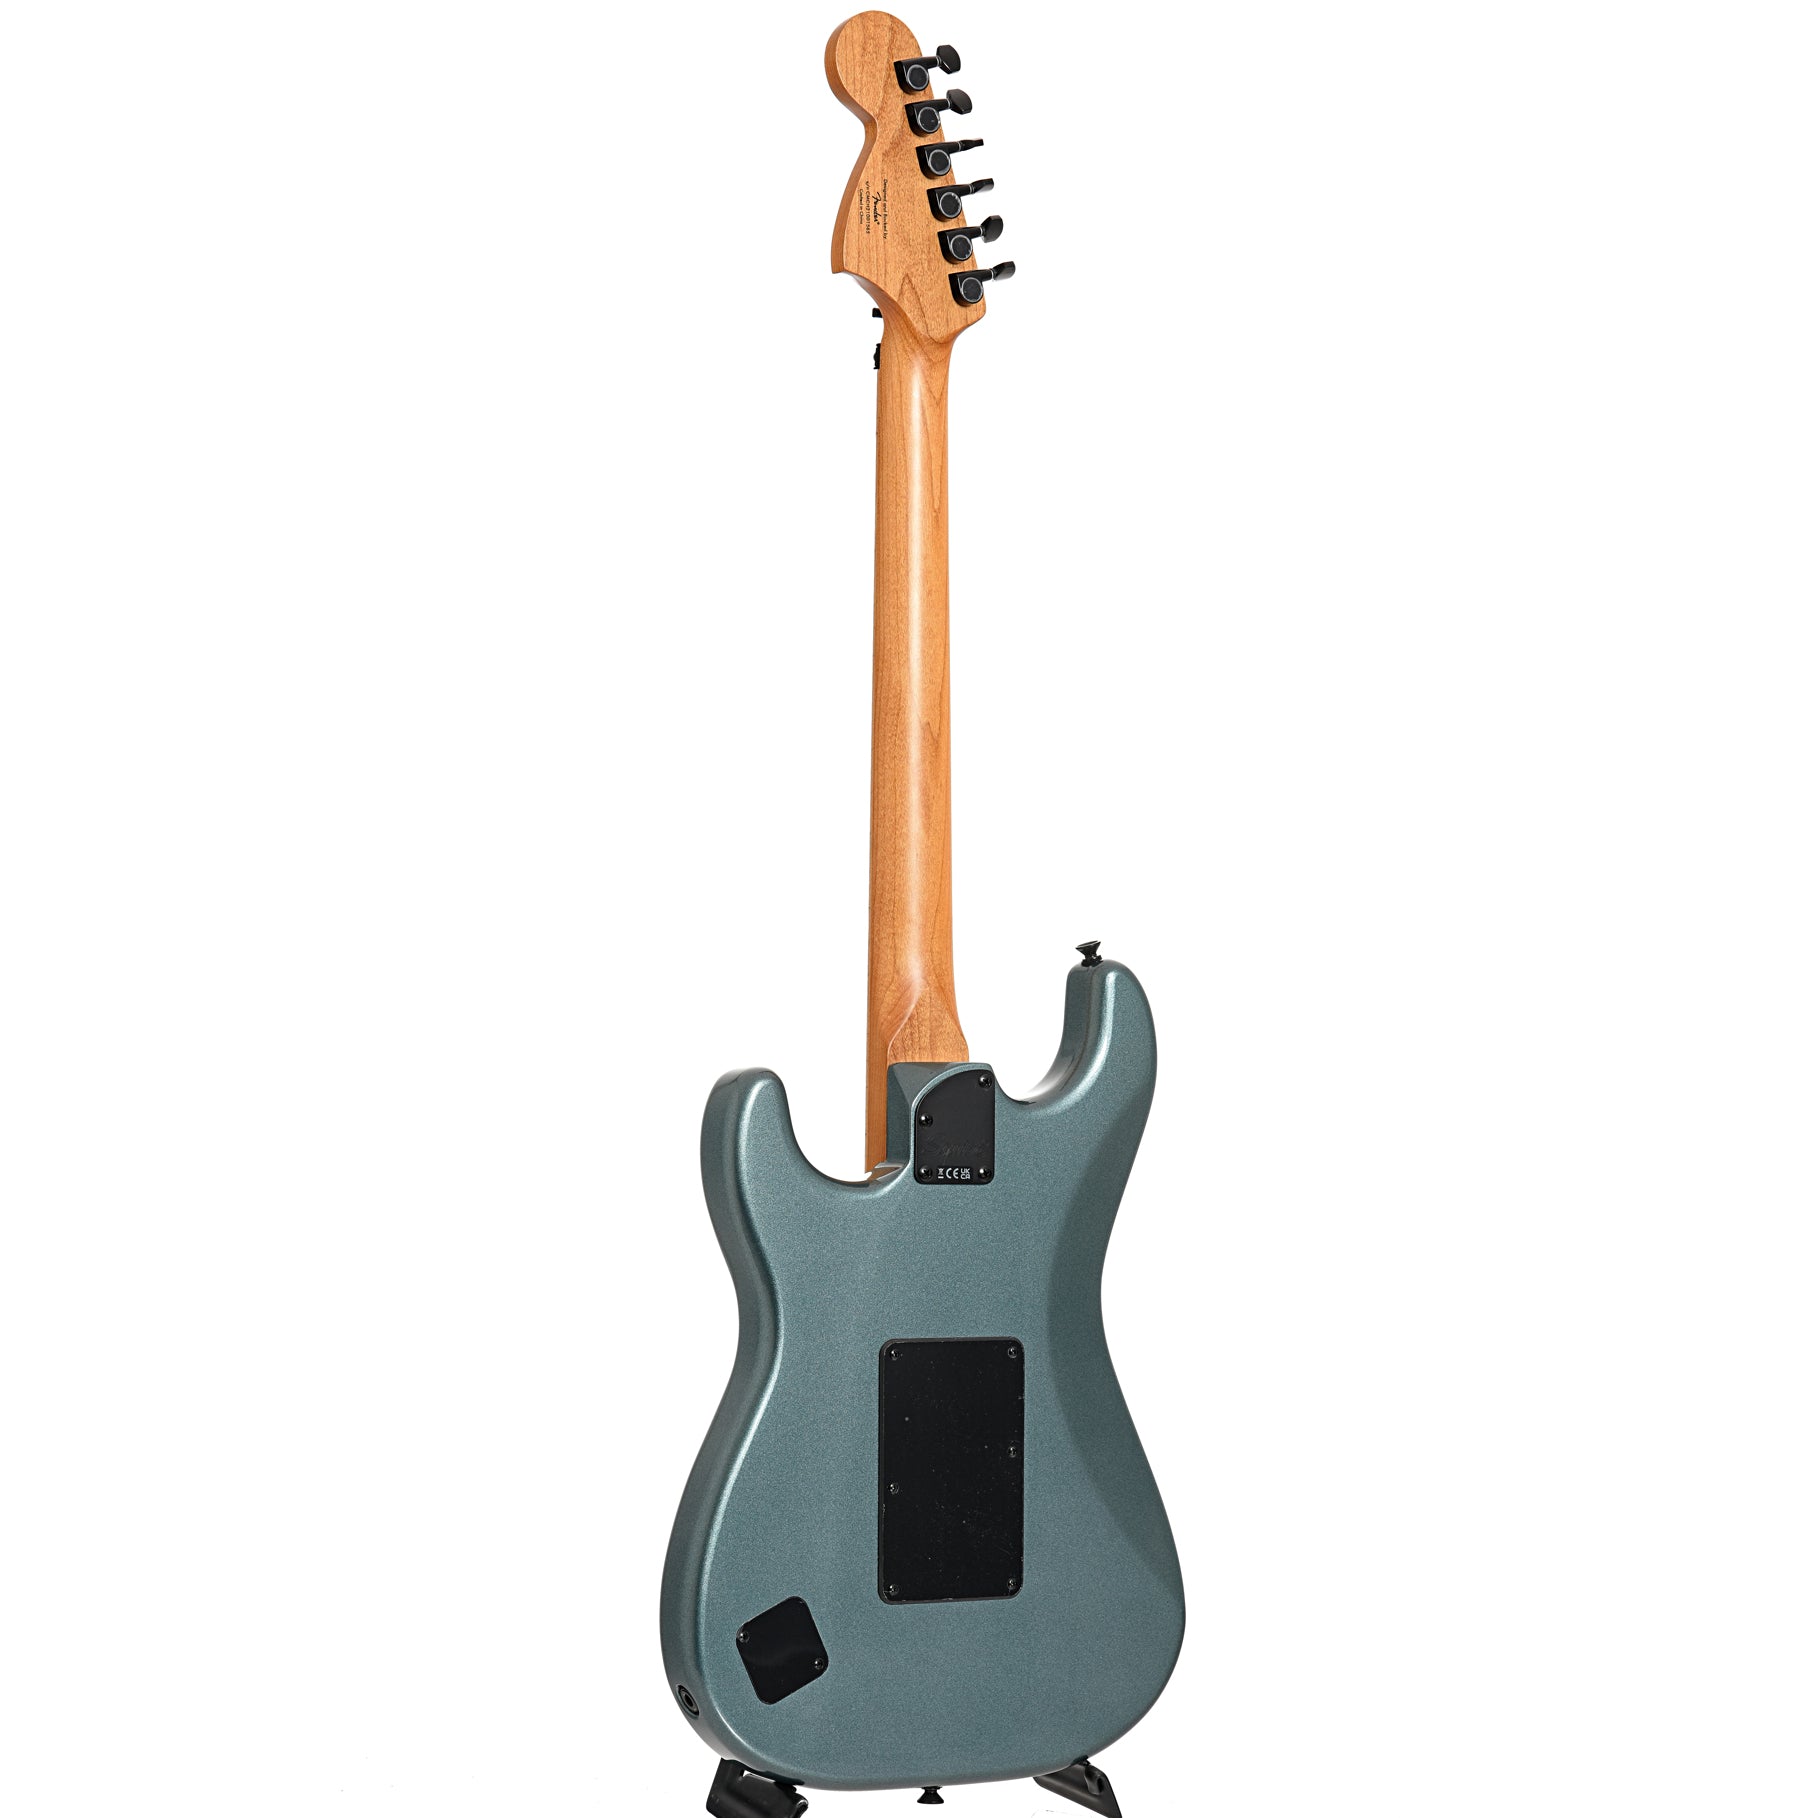 Image 12 of Squier Contemporary Stratocaster HH FR, Gunmetal Metallic - SKU# SCSHHFR : Product Type Solid Body Electric Guitars : Elderly Instruments